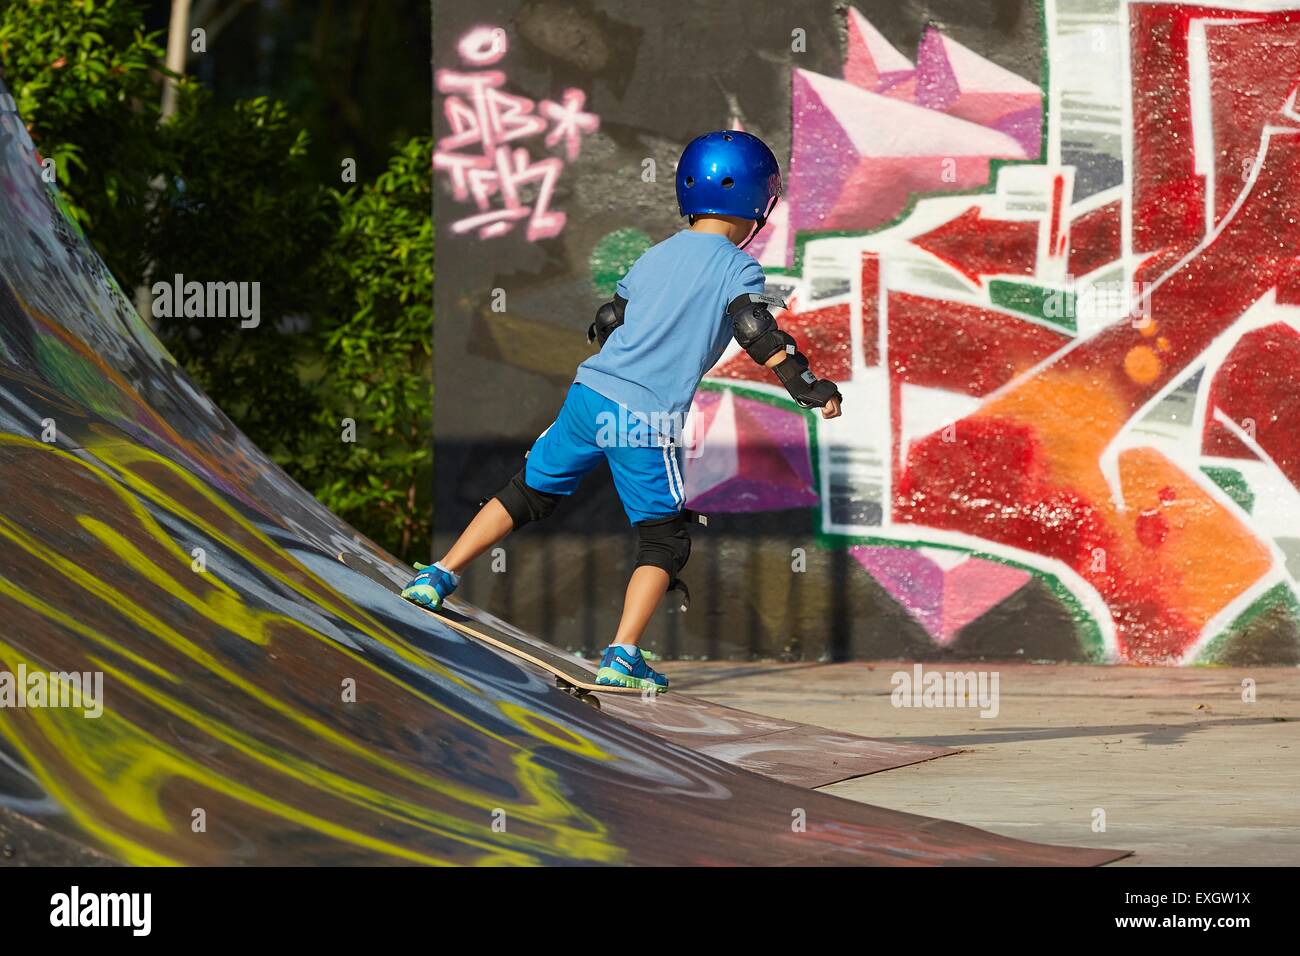 Young Boy Skateboarding in the SCAPE Skate Park, Singapore. Stock Photo